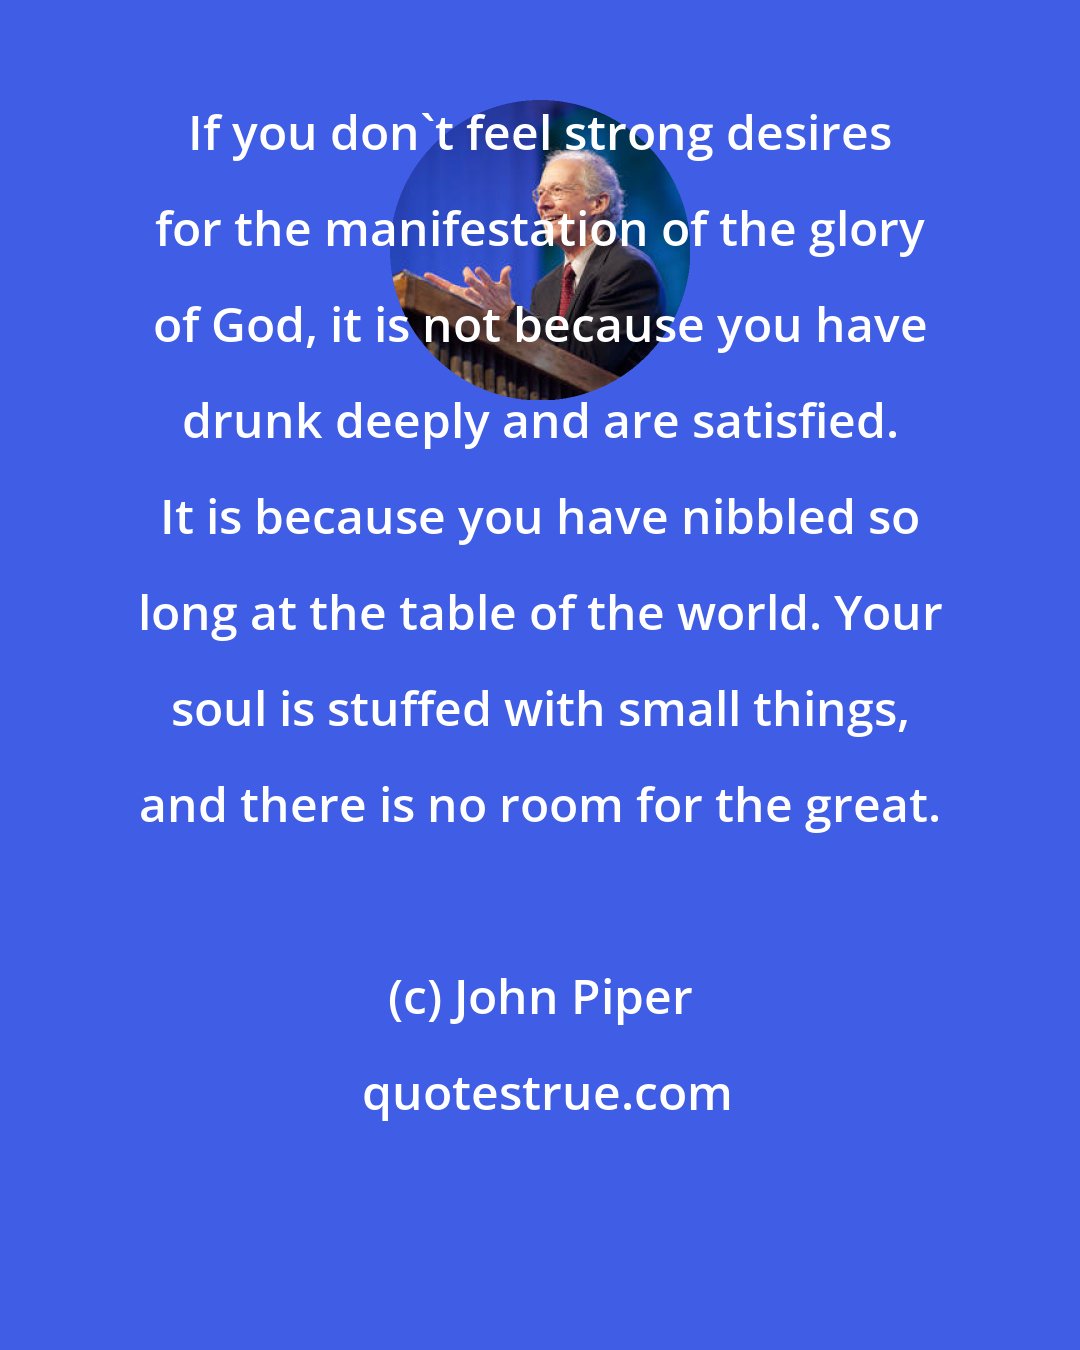 John Piper: If you don't feel strong desires for the manifestation of the glory of God, it is not because you have drunk deeply and are satisfied. It is because you have nibbled so long at the table of the world. Your soul is stuffed with small things, and there is no room for the great.